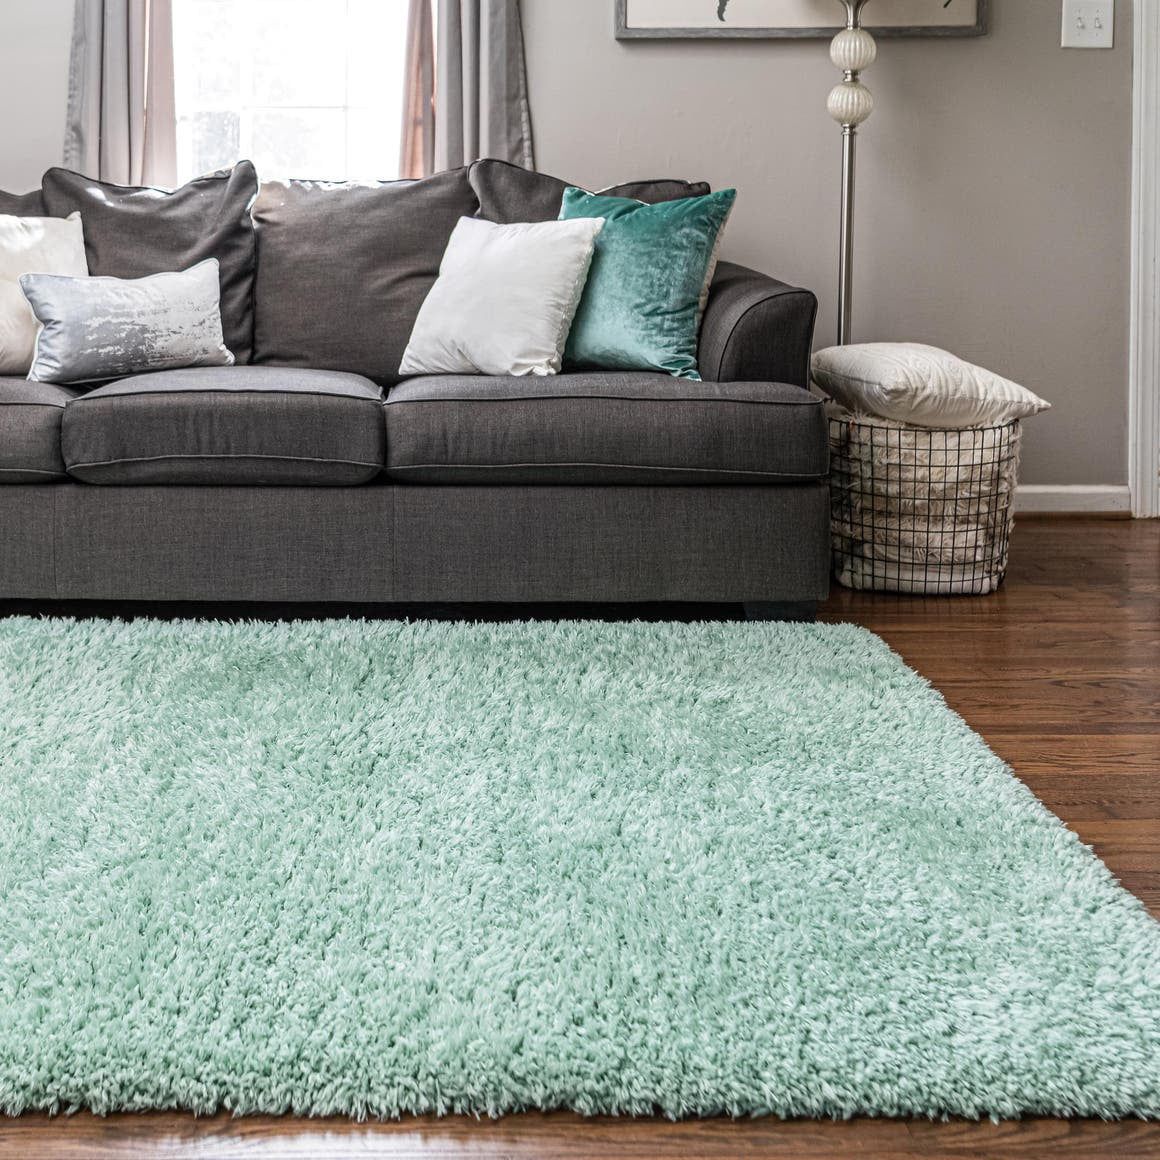 Infinity Collection Solid Shag Area Rugrugs – Cyan 9' X 12'  High Pile Plush Shag Rug Perfect For Living Rooms, Bedrooms, Dining Rooms  And More – Walmart For Ash Infinity Shag Rugs (View 4 of 15)